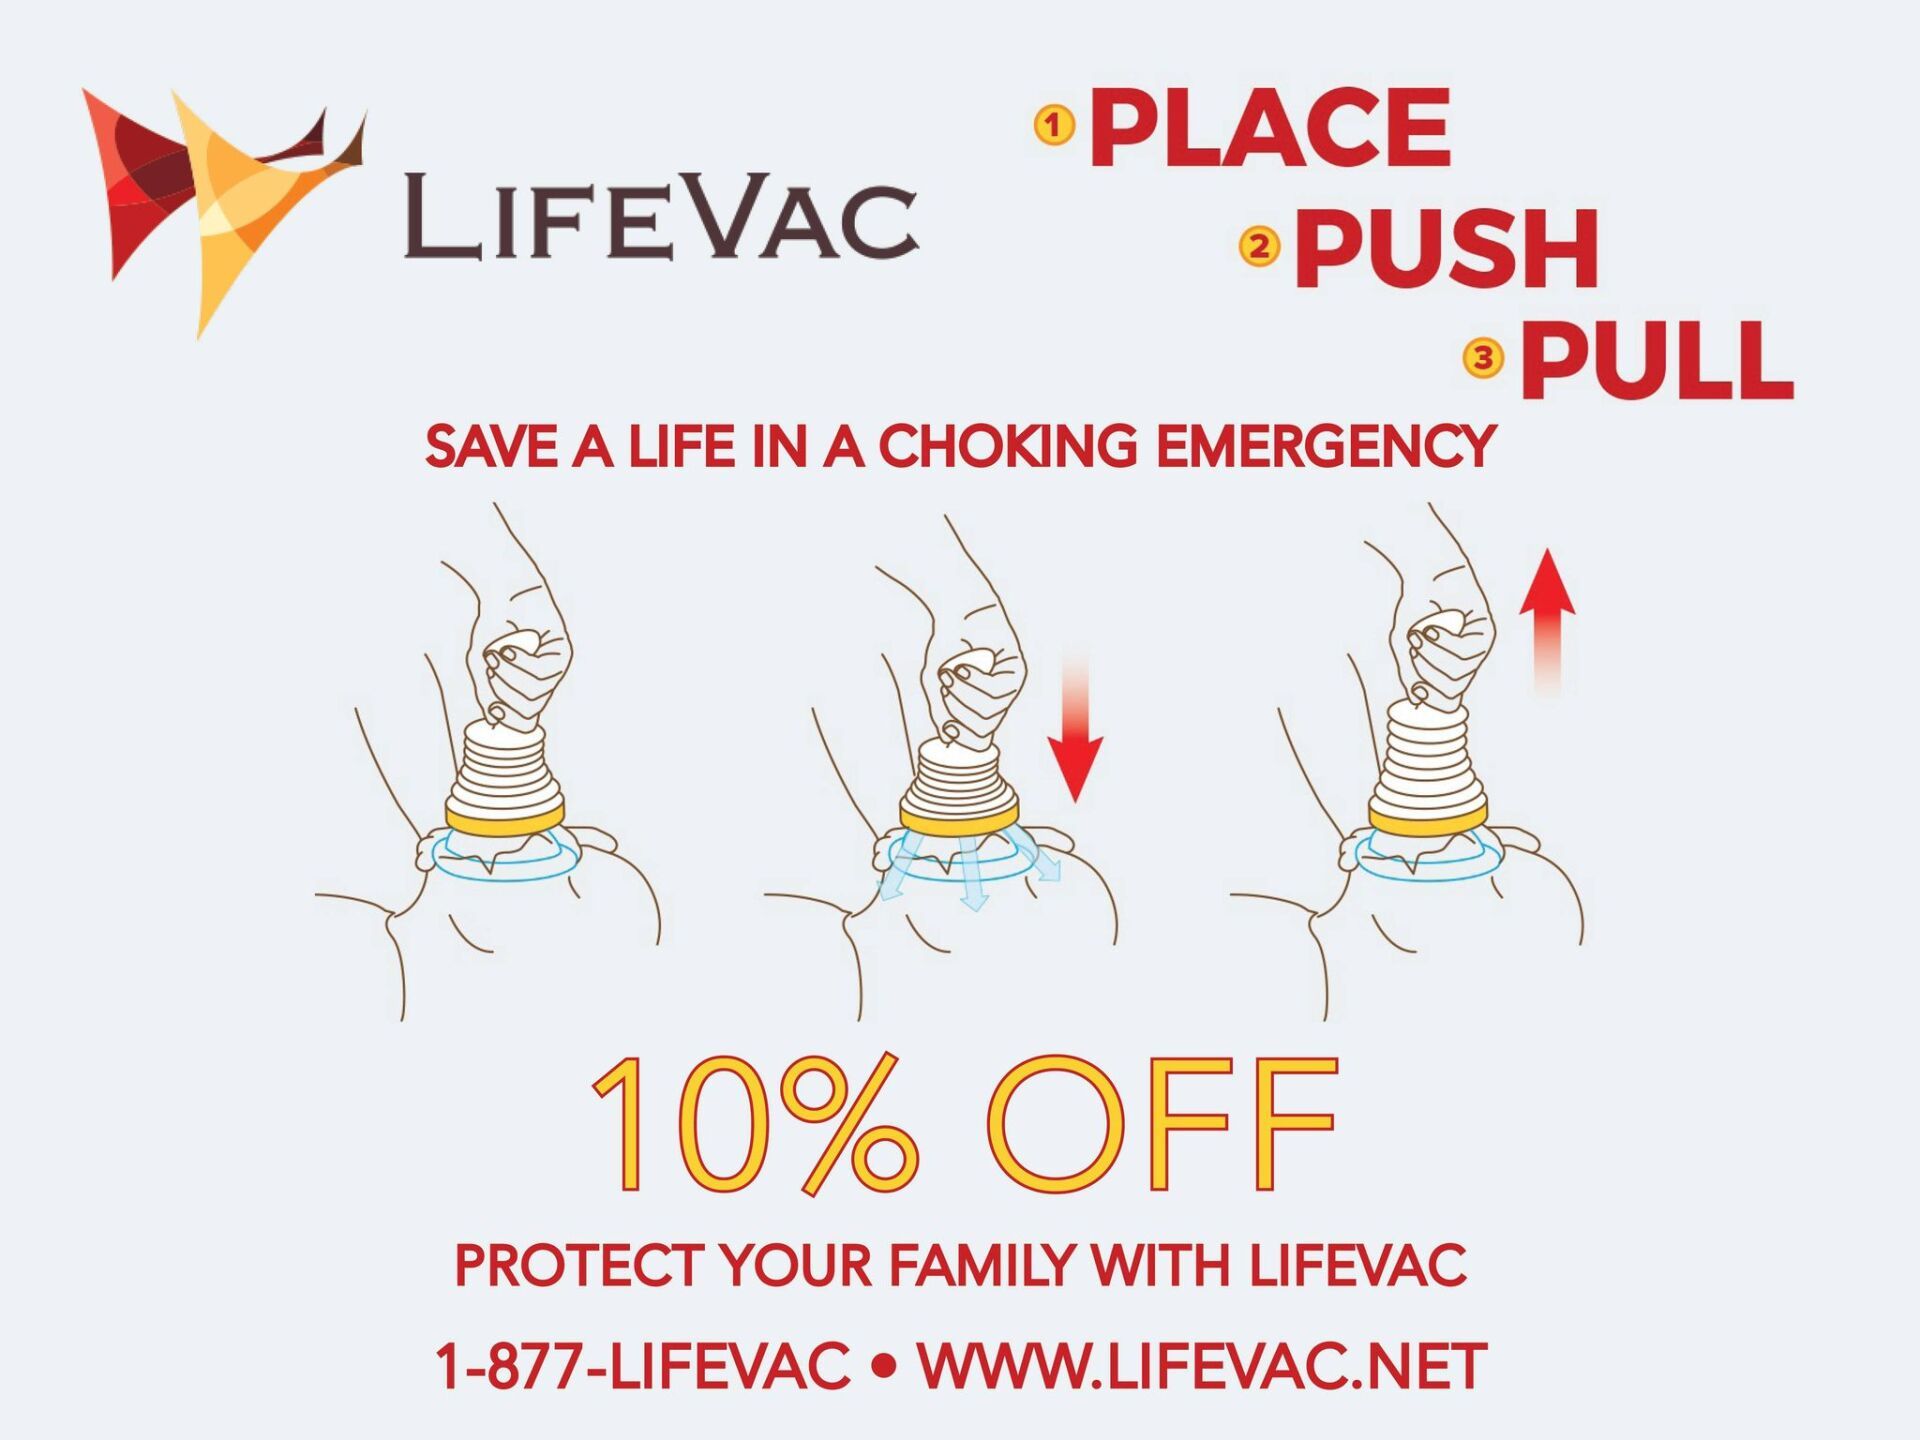 An advertisement for lifevac shows how to save a life in a choking emergency